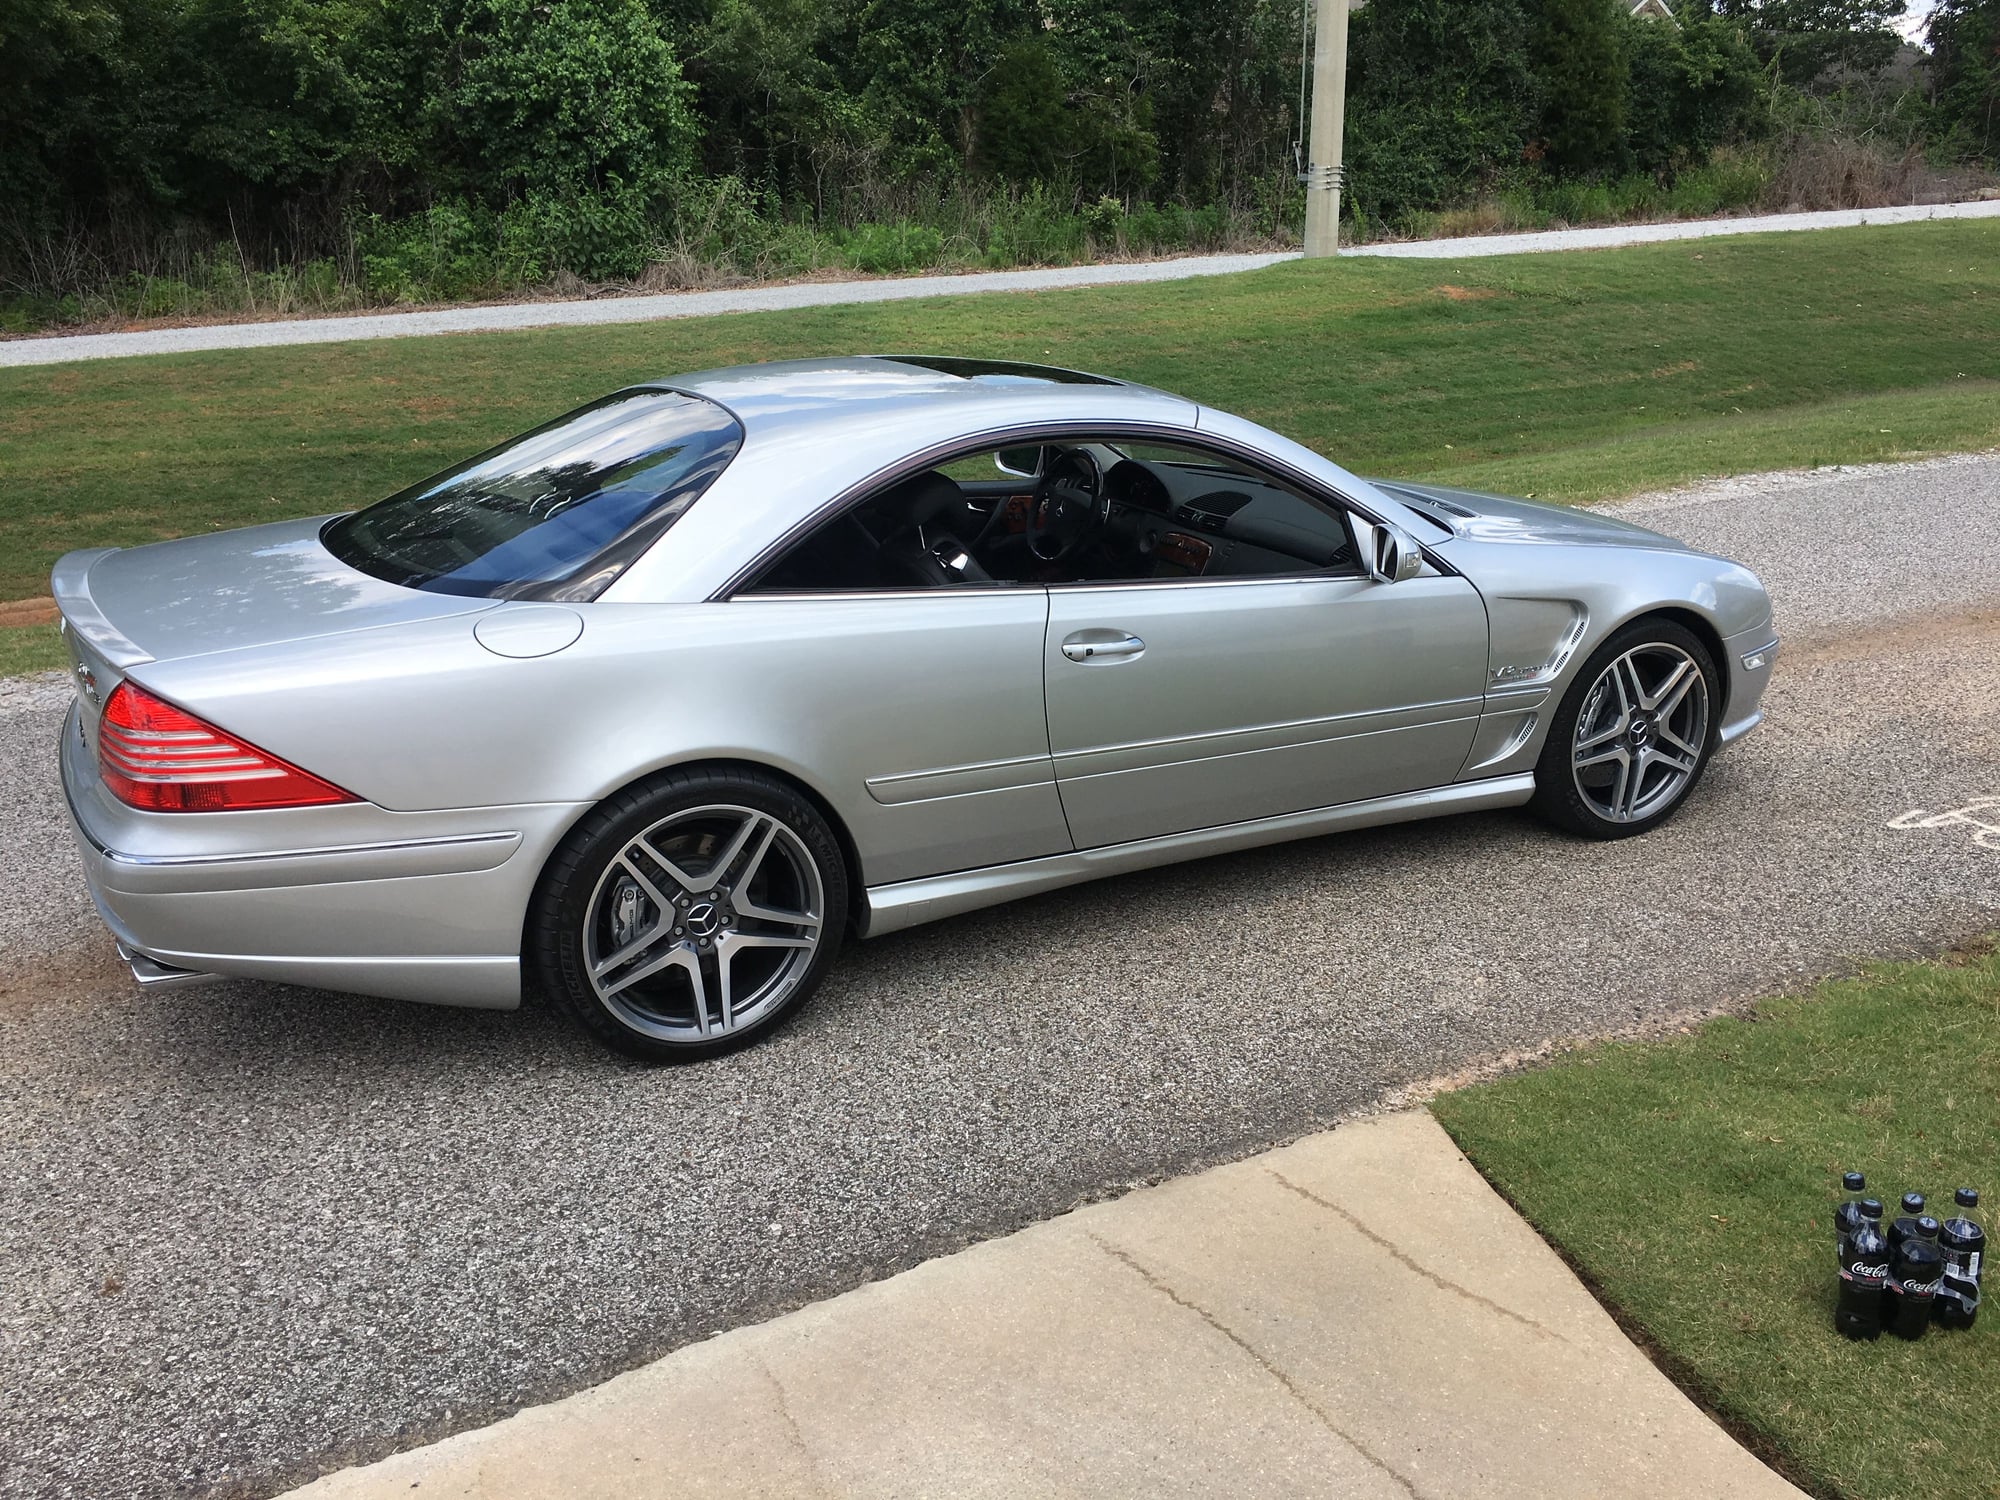 Wheels and Tires/Axles - 20" FORGIATO BLACK CHROME WHEELS/TIRES MERCEDES CL65 / S65 - Used - 2005 to 2006 Mercedes-Benz CL65 AMG - 2006 Mercedes-Benz S65 AMG - Huntsville, AL 35824, United States